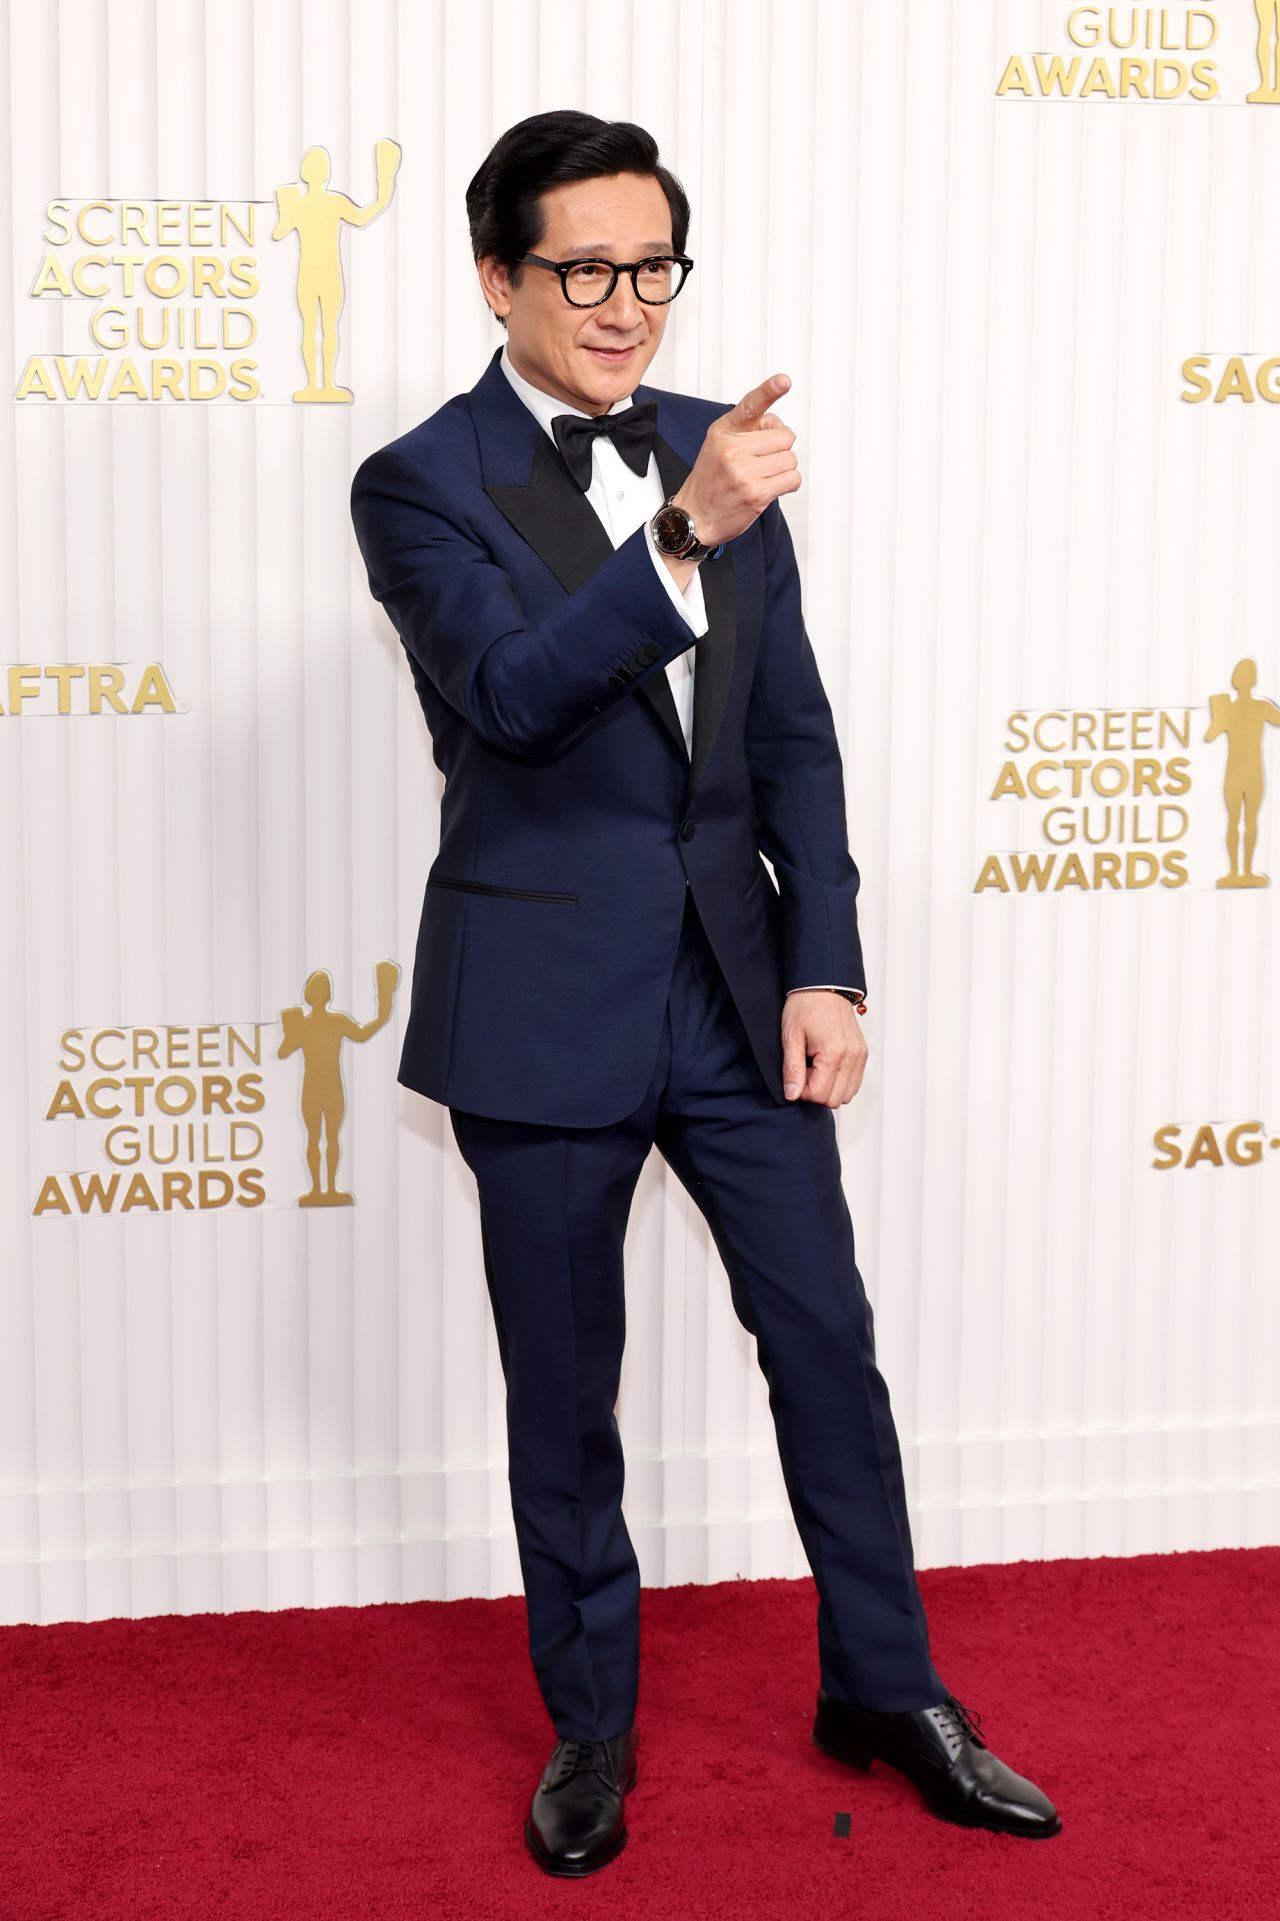 Ke Huy Quan, nominated for his turn in "Everything Everywhere All at Once," accessorized his navy tuxedo with a statement De Beers broach and an Omega watch.